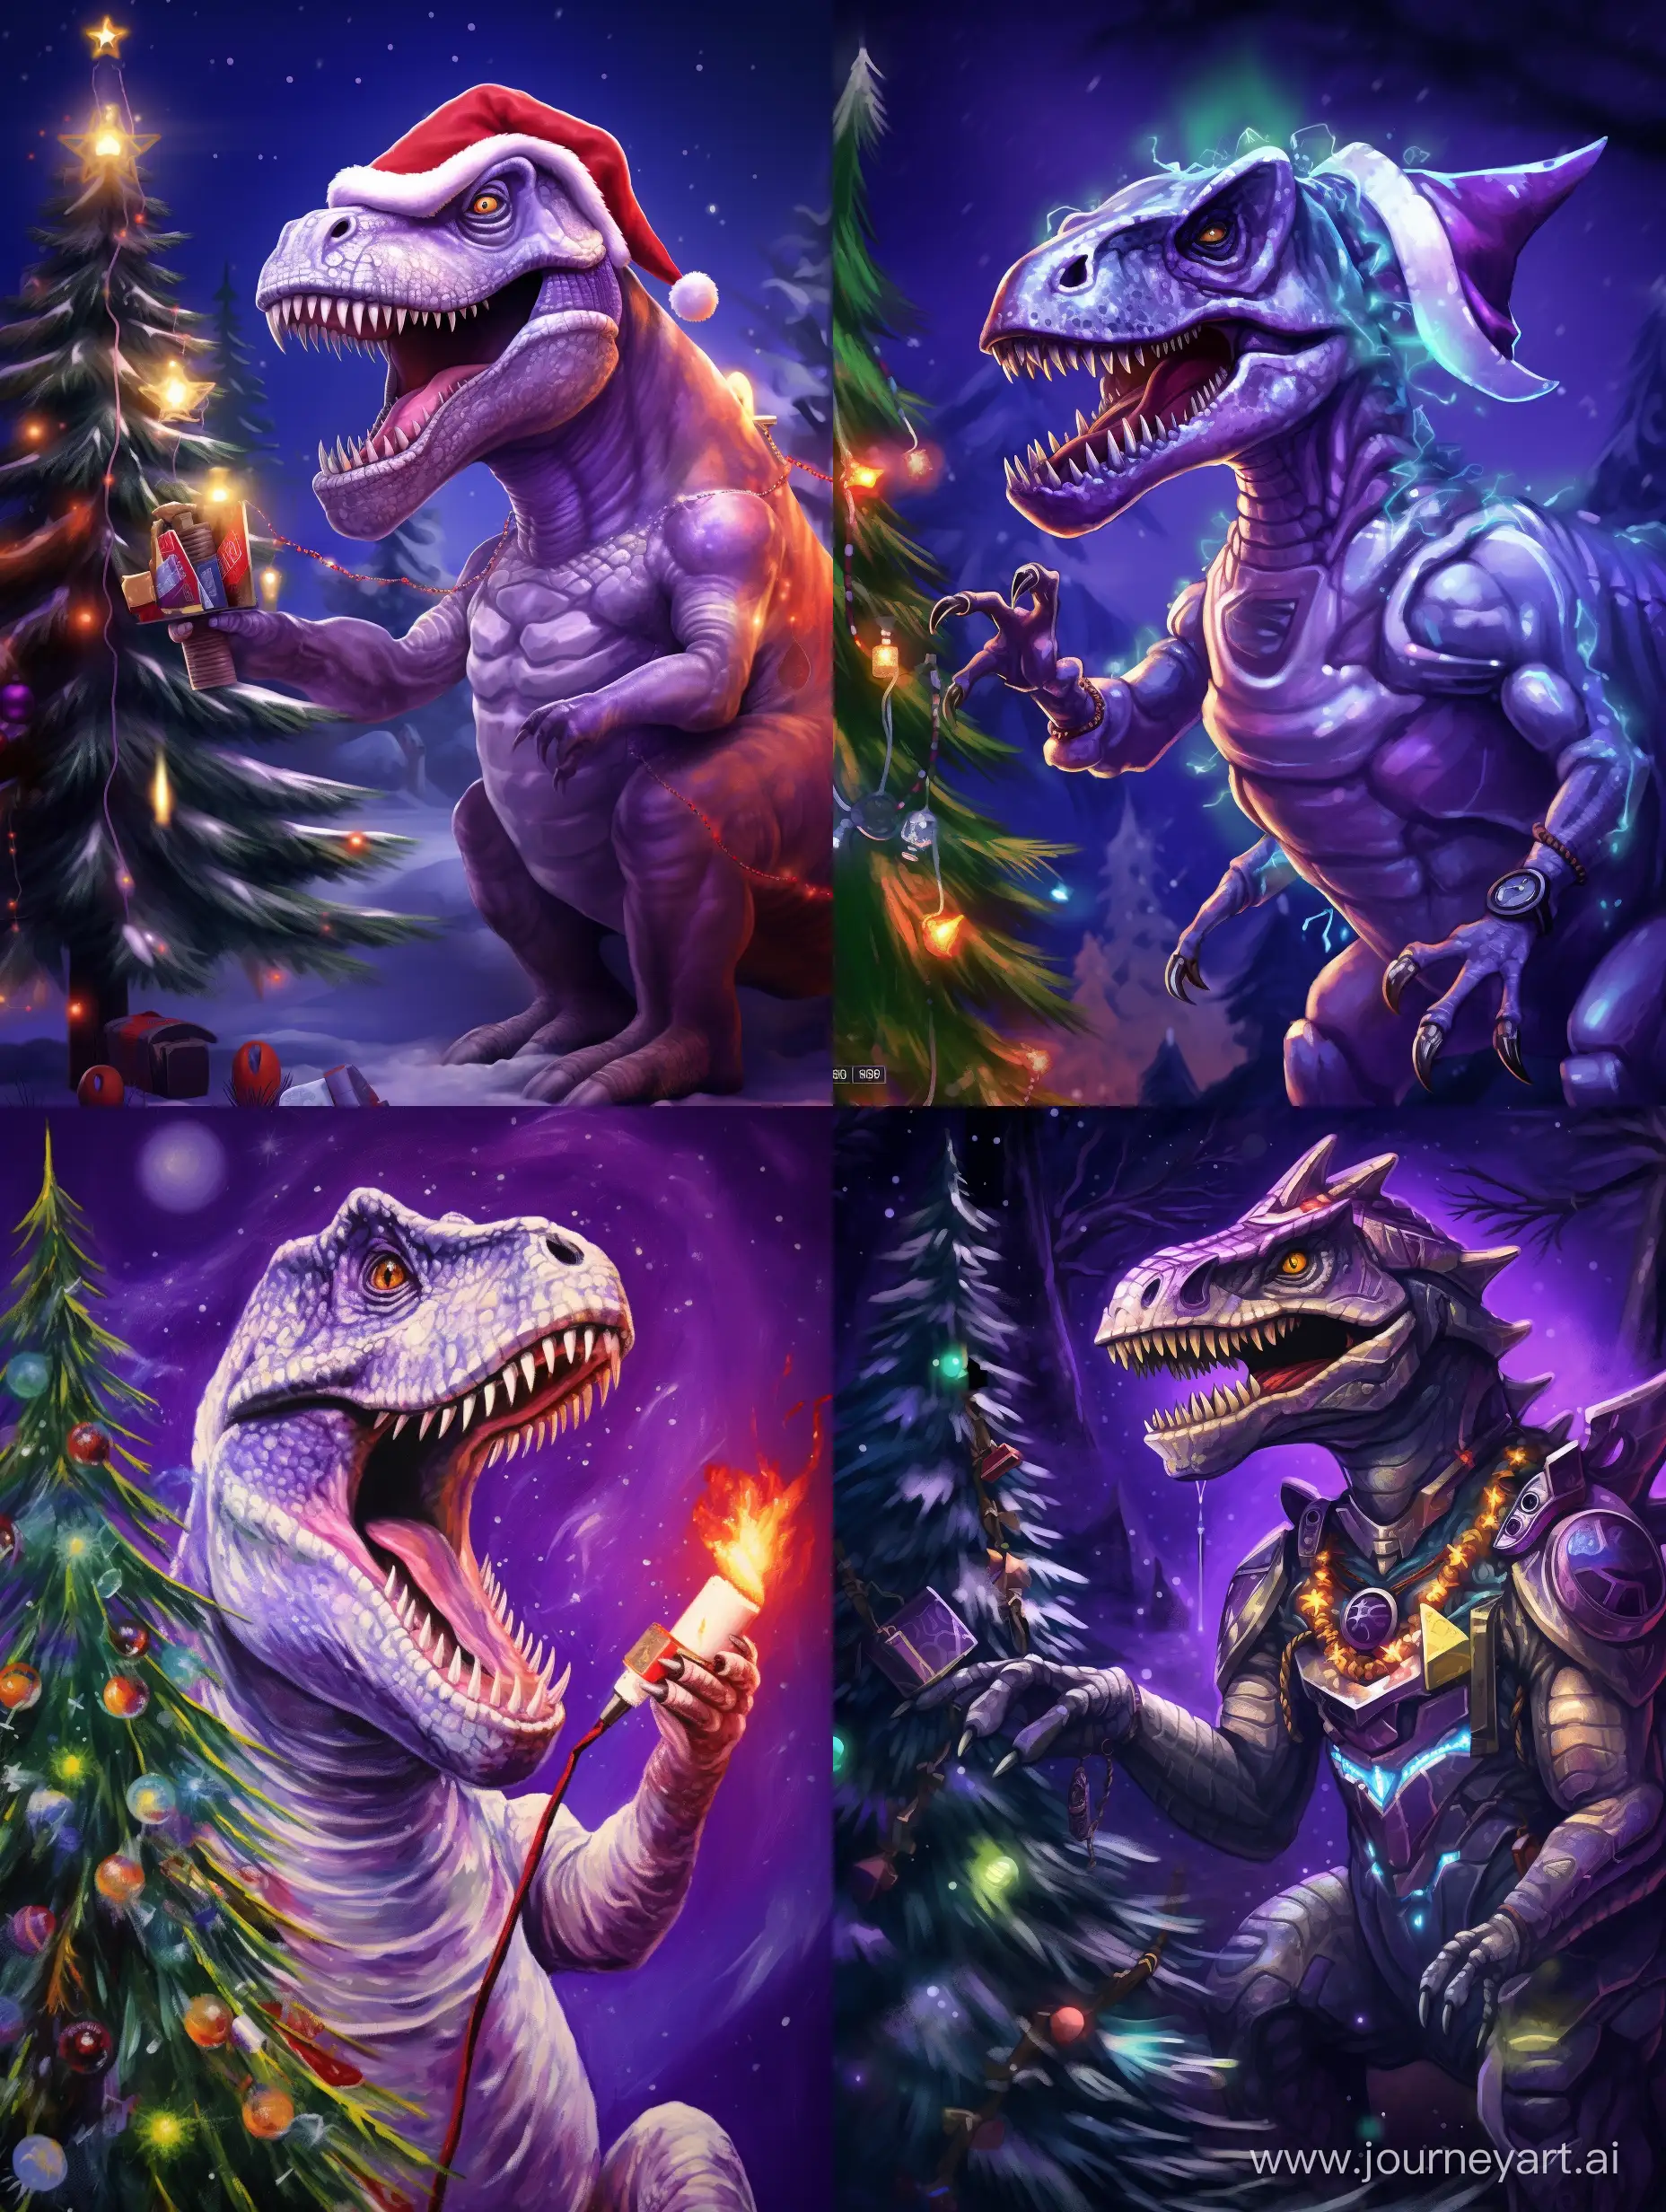 A tyrannosaurus robot made of metal with LED eyes, purple with silver, climbs on a Christmas tree to get a star , painted with paint on canvas, children's drawing style